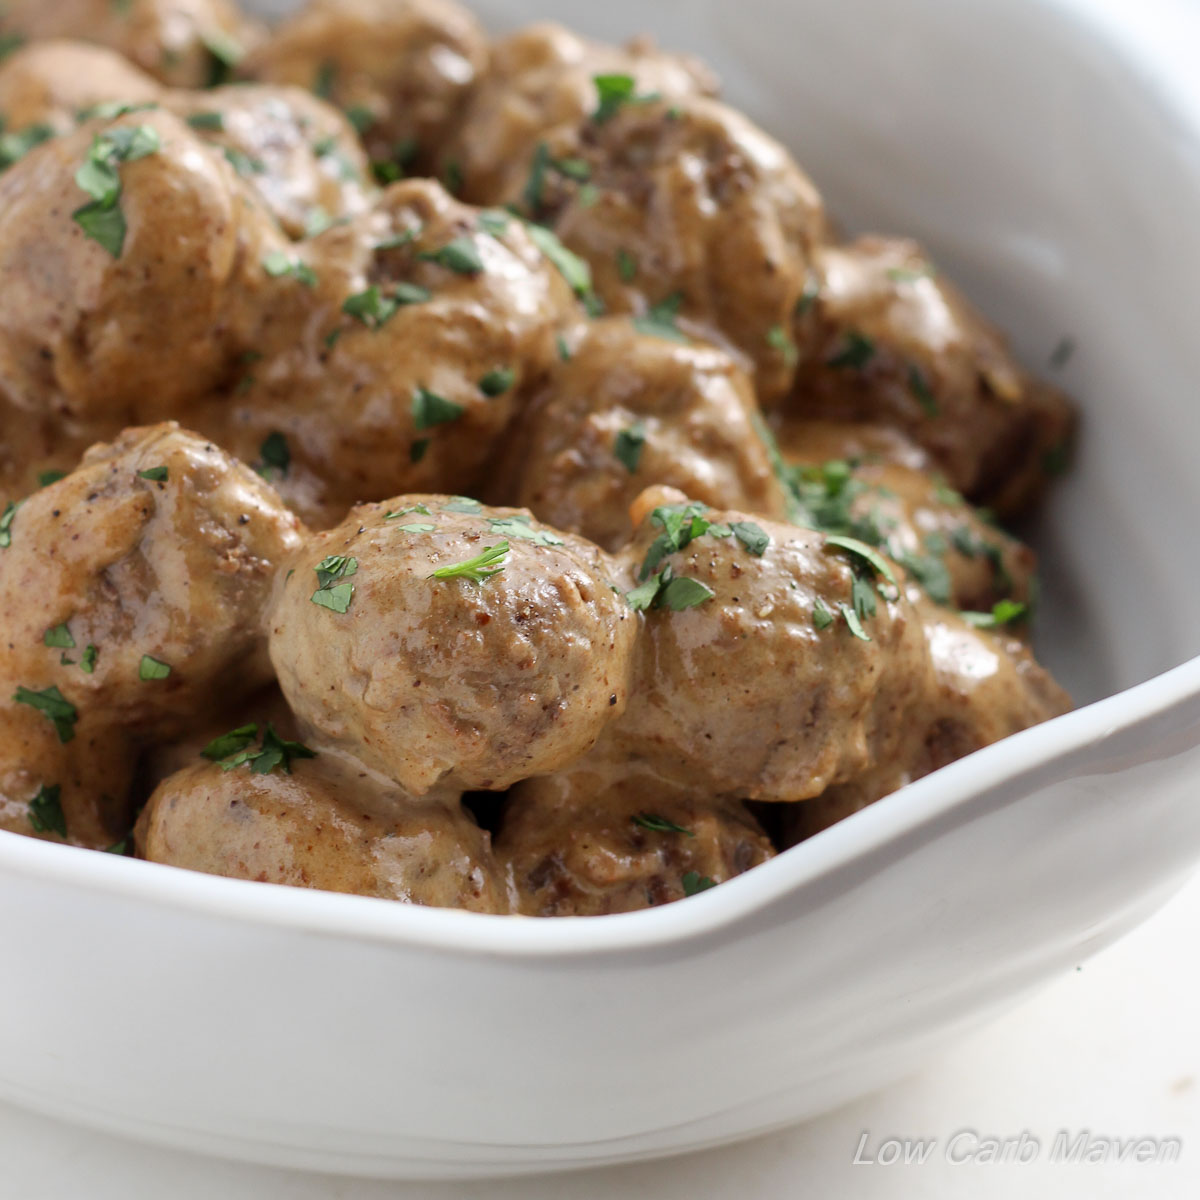 Low Carb Swedish Meatballs - great as an appetizer or a meal served over zo...